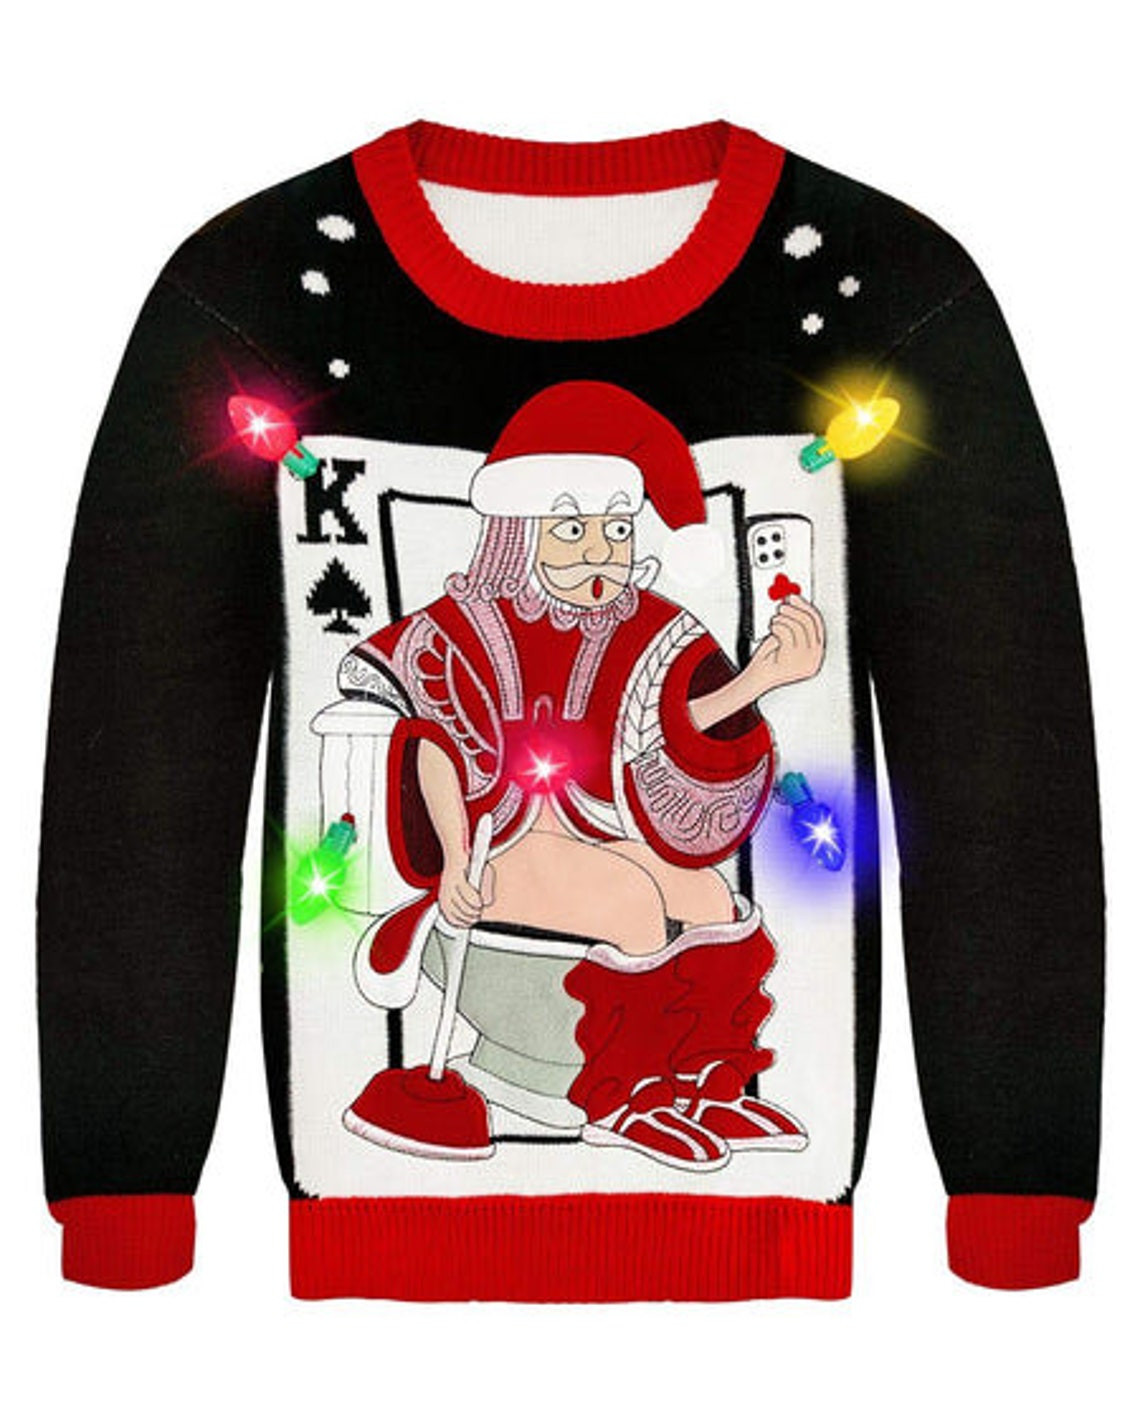 Camlinbo Light Up Mens Santa Poker Knit New Year Eve Holiday Sweater Ugly Sweater